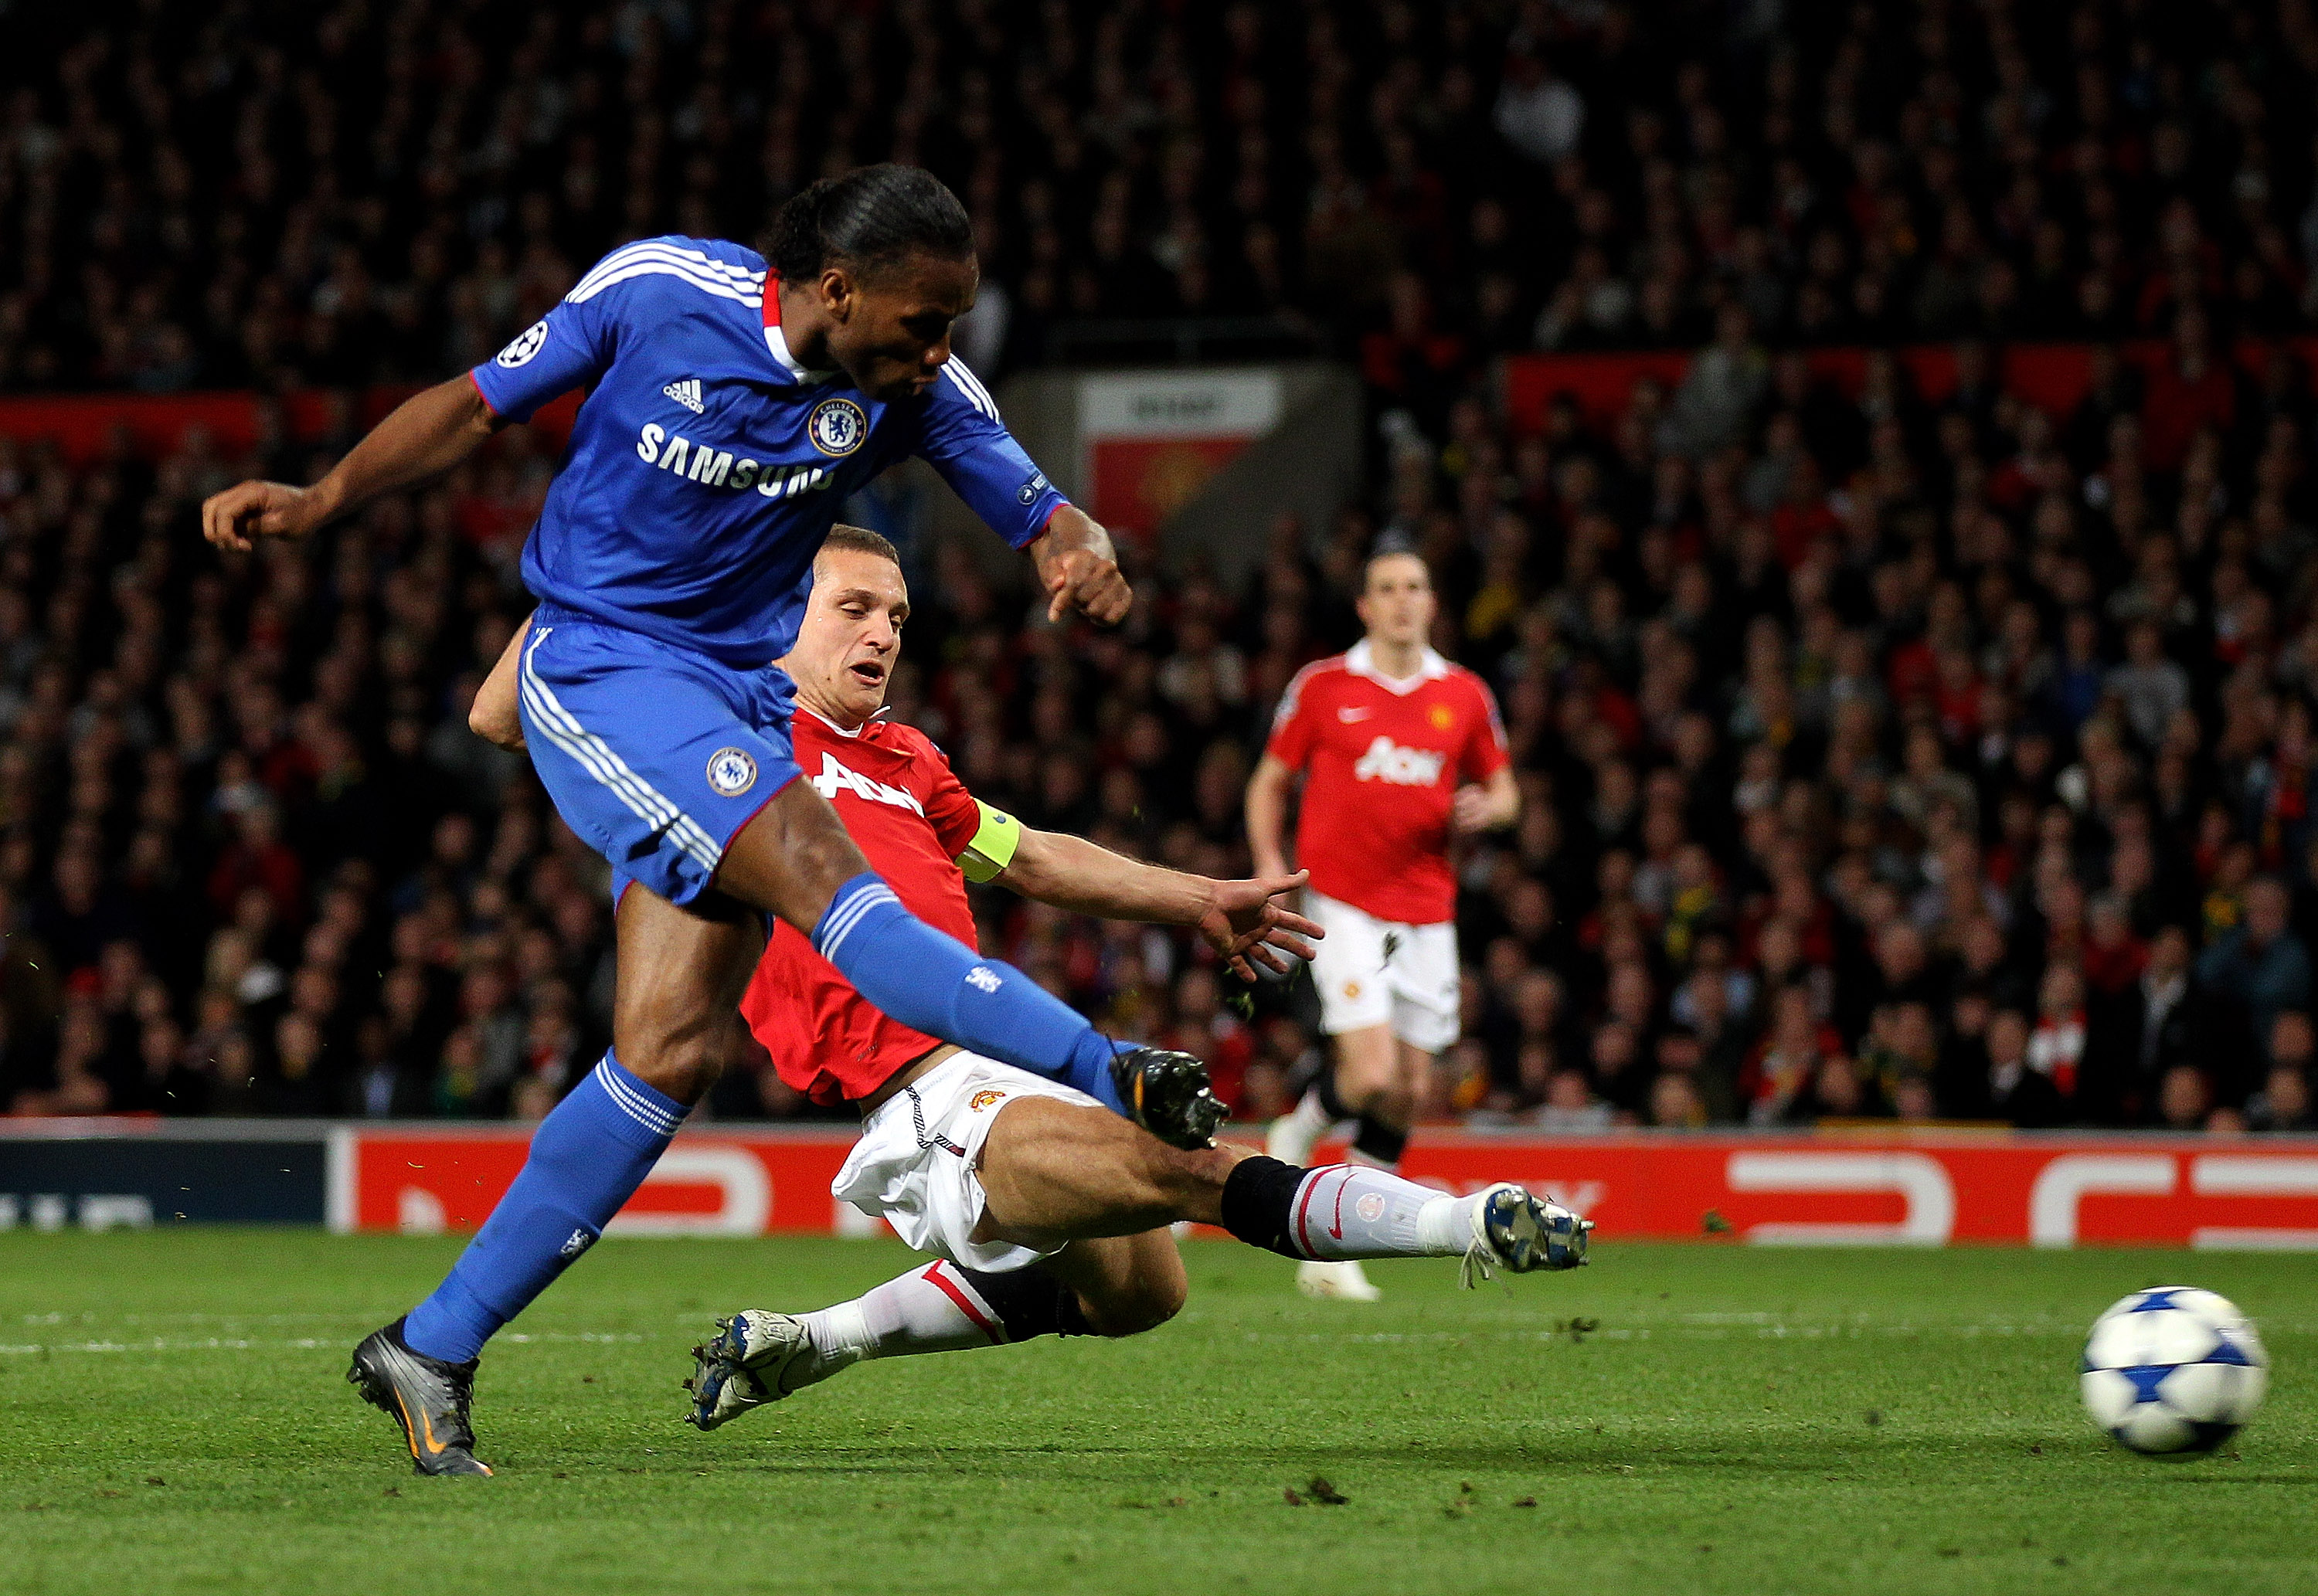 MANCHESTER, ENGLAND - APRIL 12:  Didier Drogba of Chelsea scores his team's first goal during the UEFA Champions League Quarter Final second leg match between Manchester United and Chelsea at Old Trafford on April 12, 2011 in Manchester, England.  (Photo 